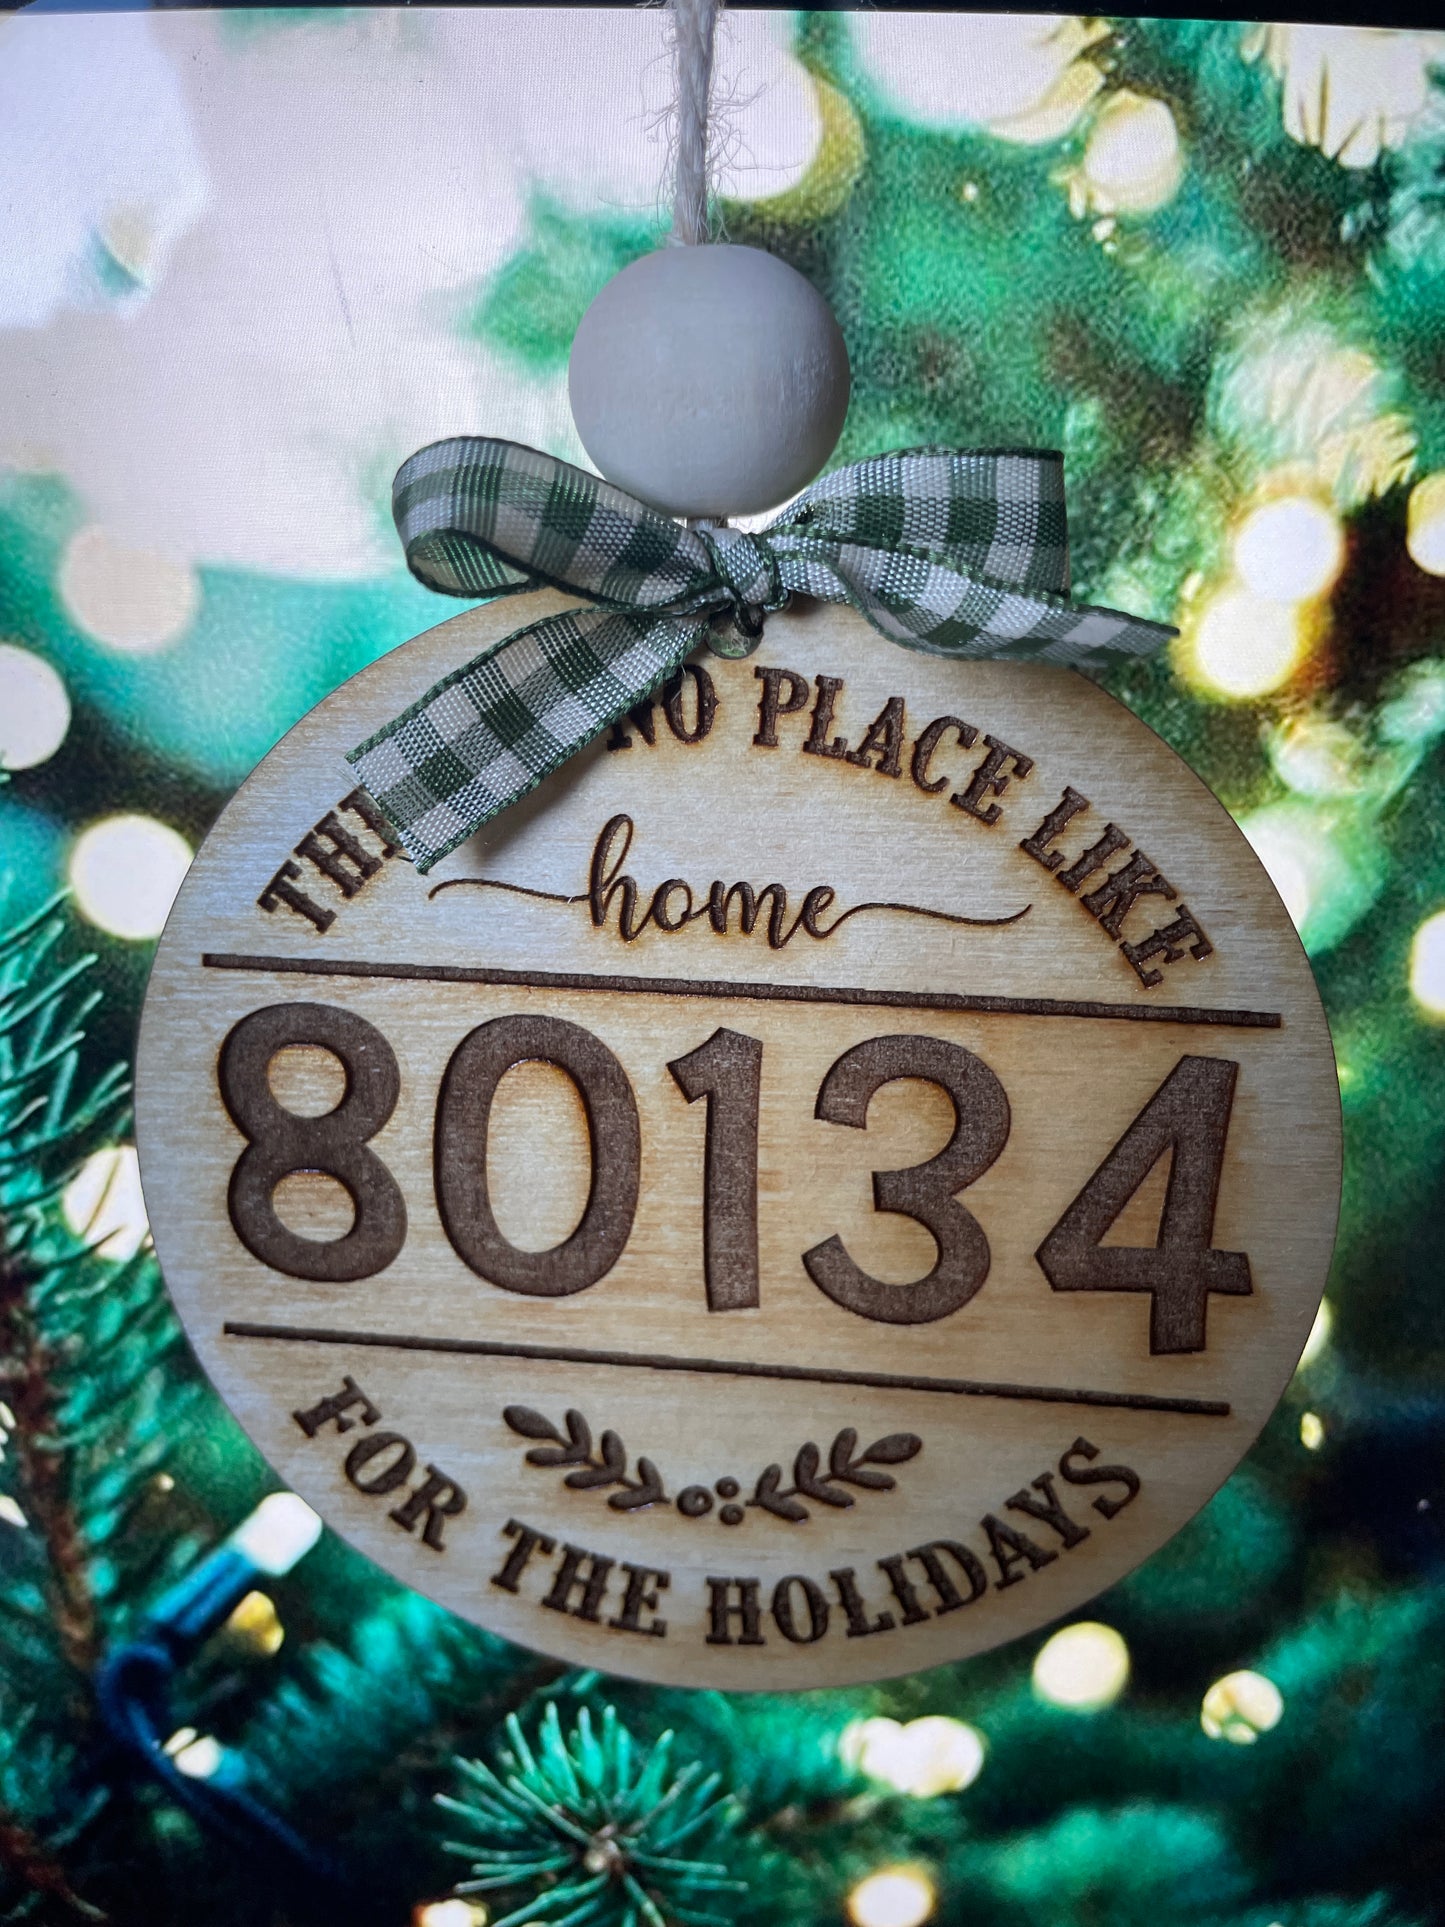 Zip code Holiday ornament